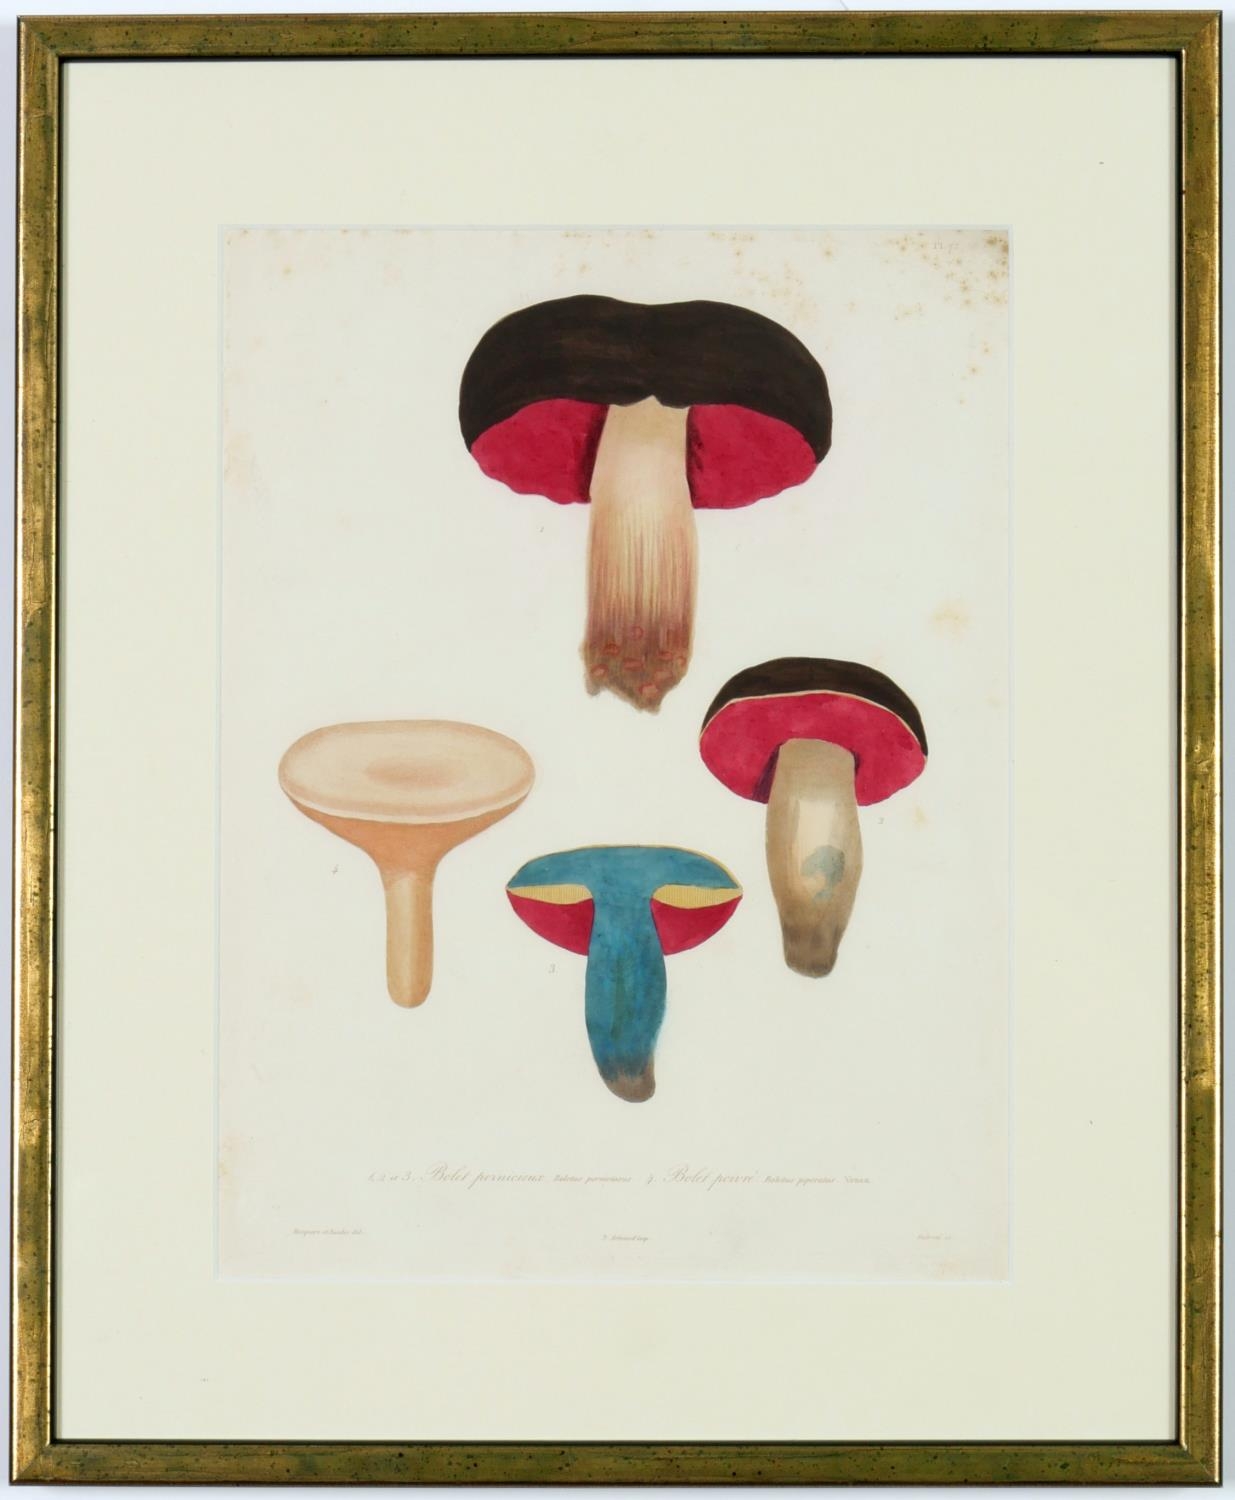 JOSEPH ROQUES, Mushrooms, a set of nine rare engravings with hand colouring, 1864, Victor Masson - Image 5 of 10